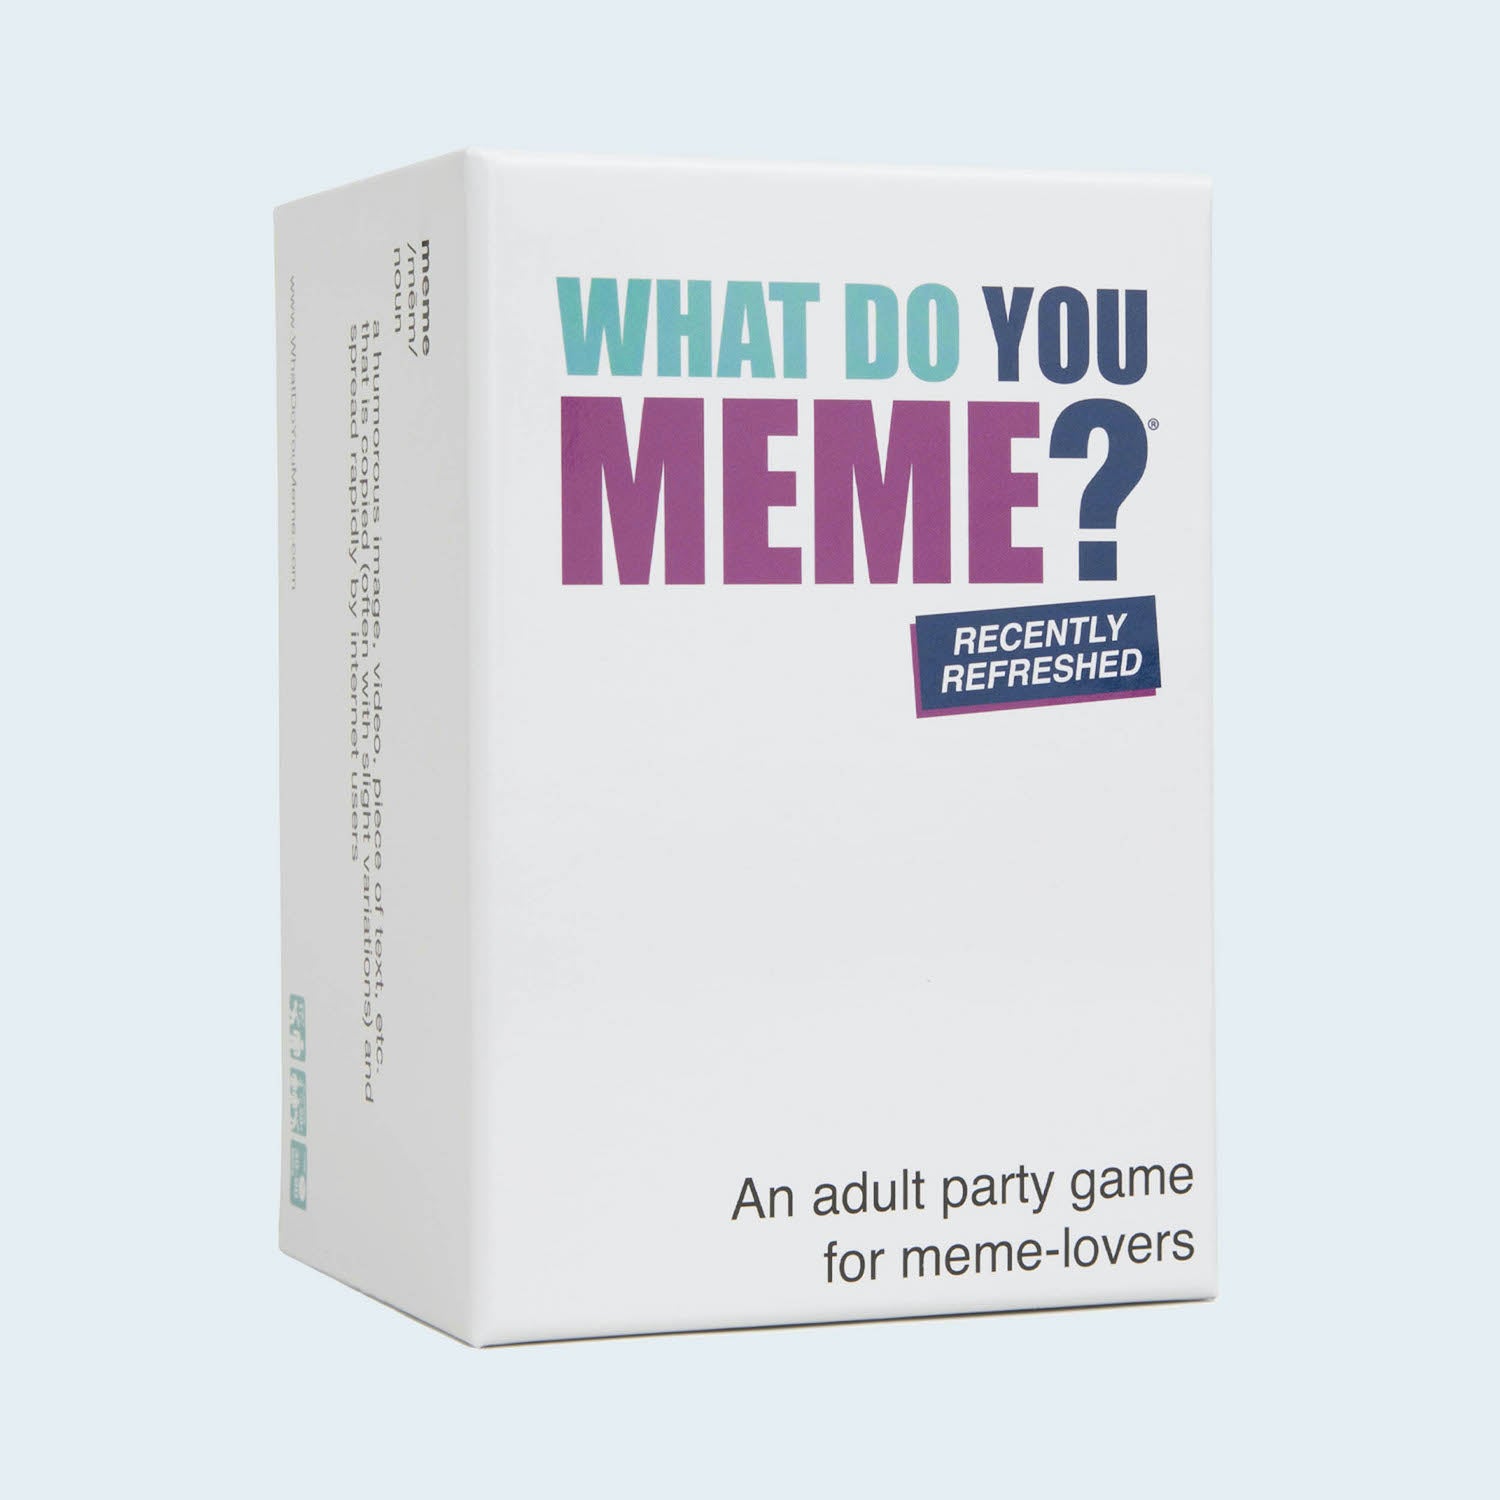 What Do You Meme? Emotional Support Strawberries Games